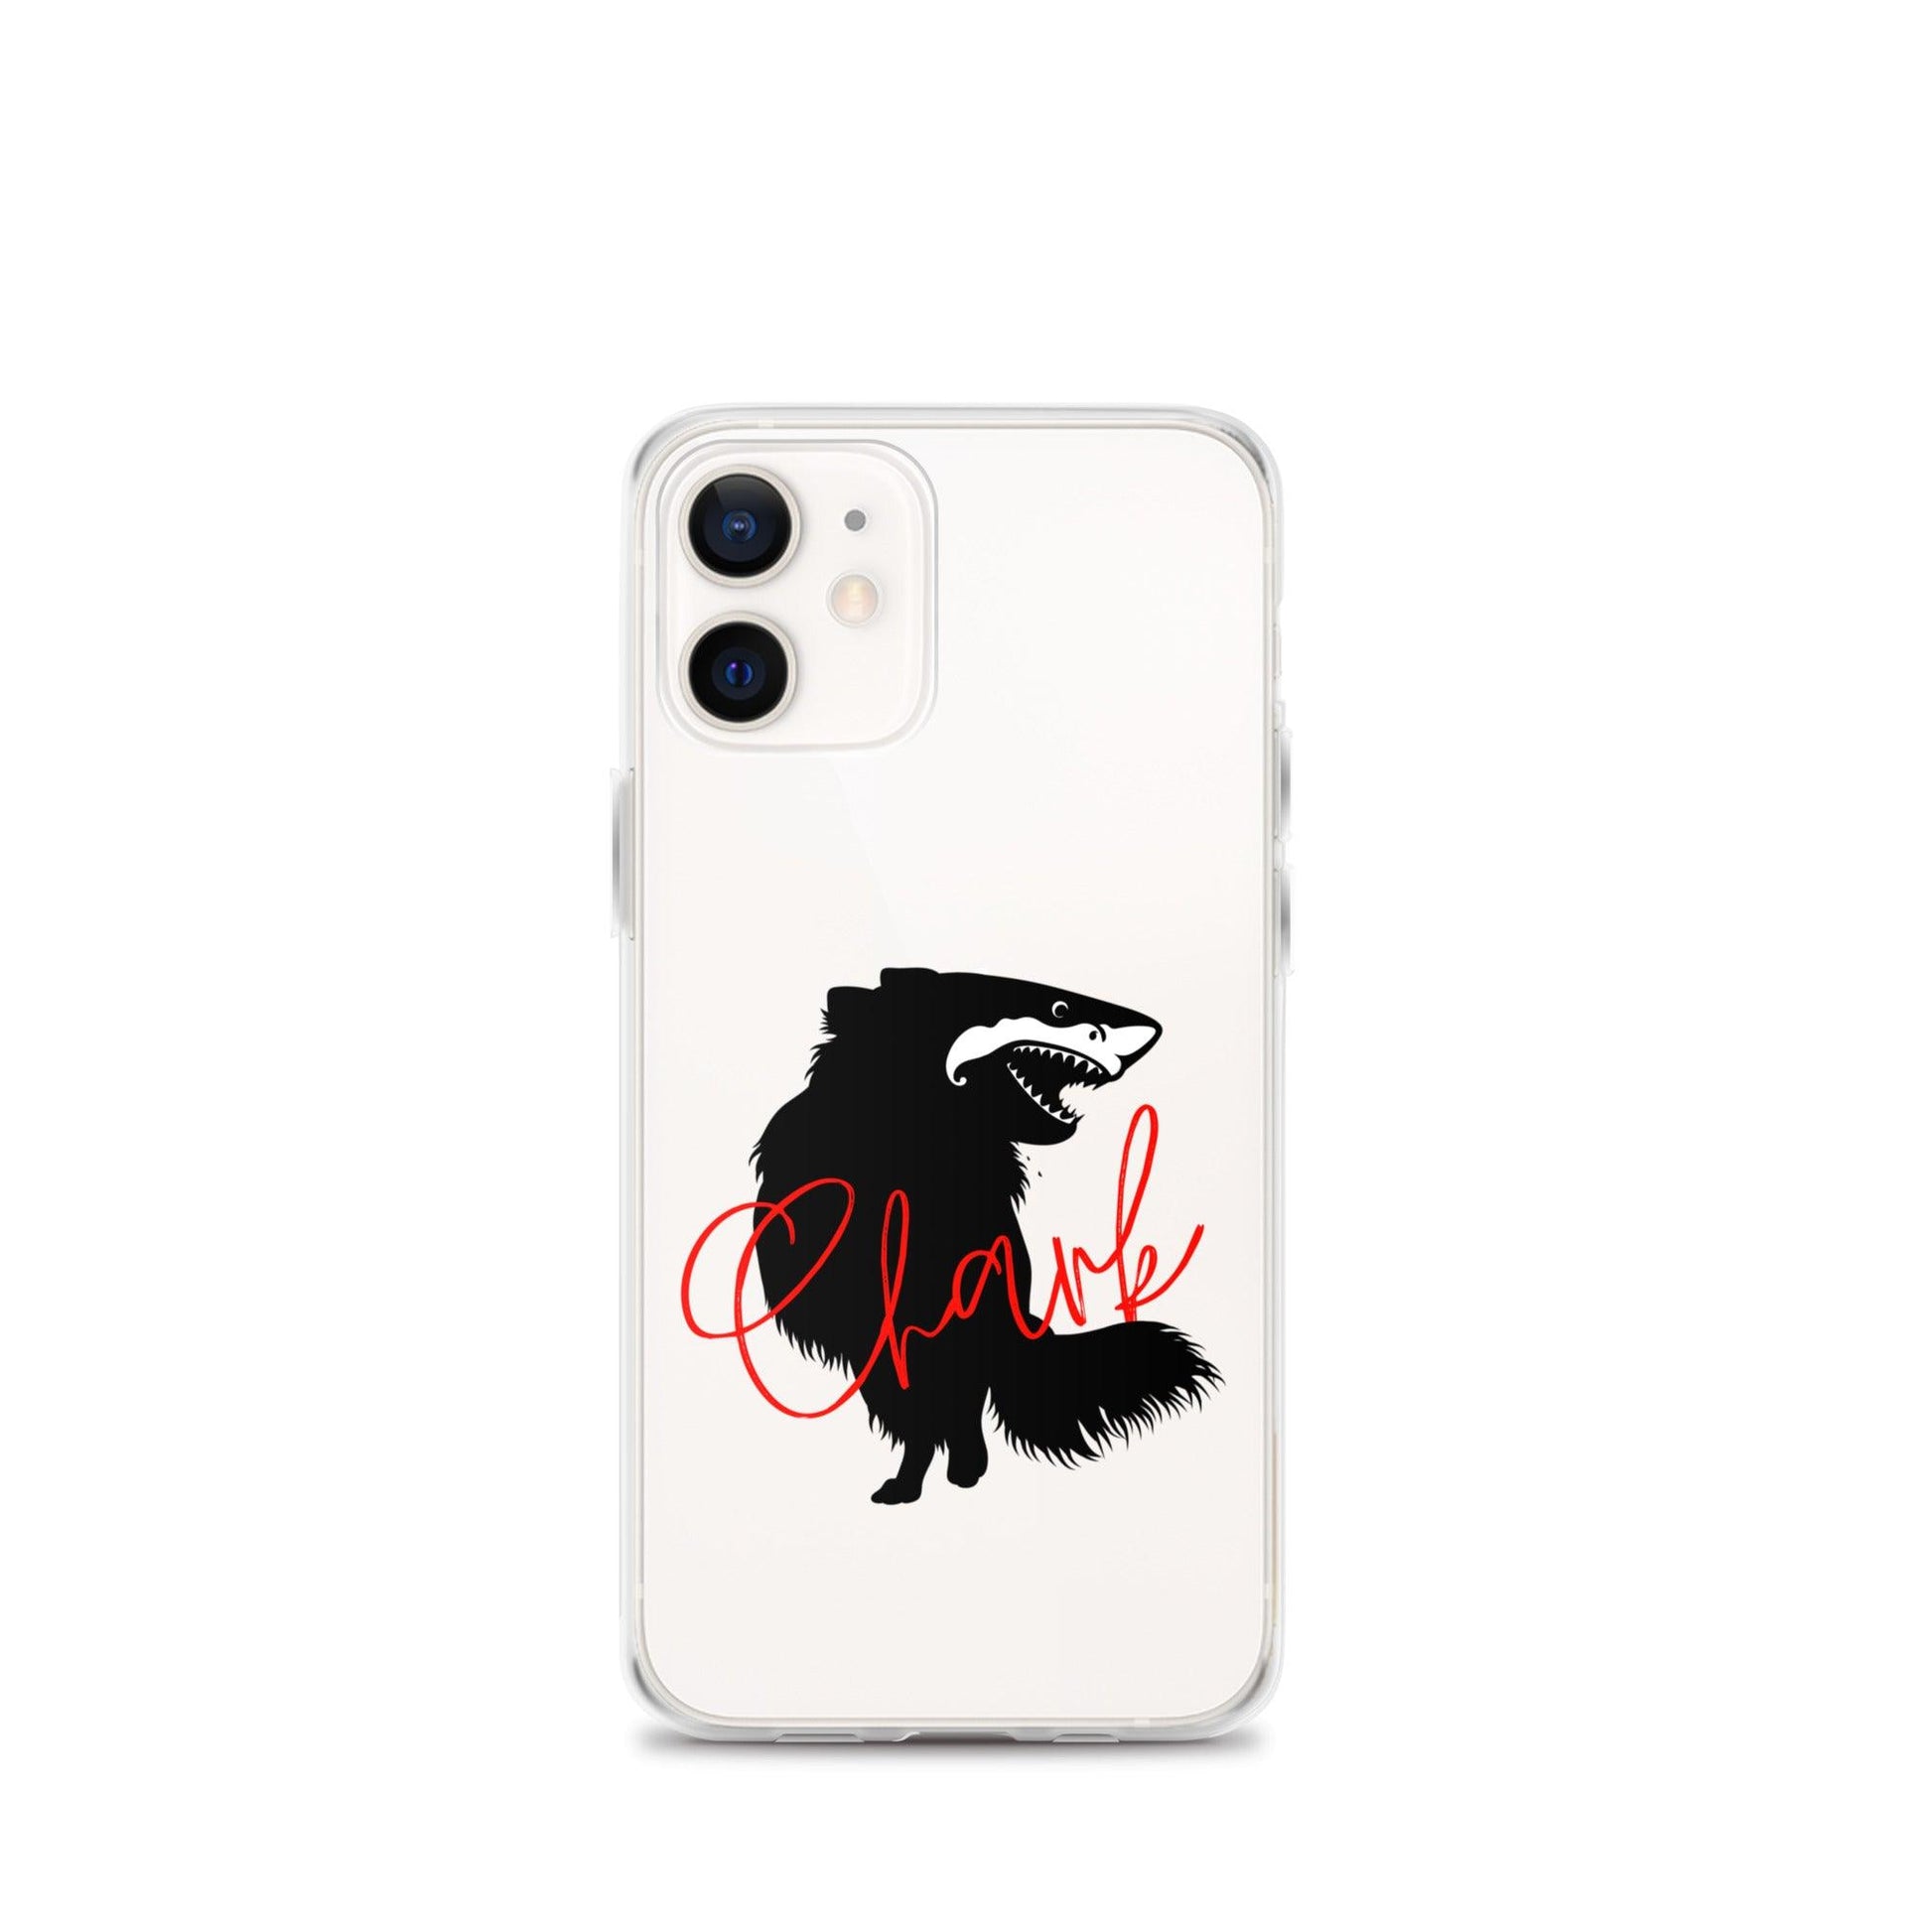 Chihuahua + Shark = Chark Clear iPhone case with the black silhouette of a longhaired chihuahua with the face of a great white shark - mouth open to show off jaws lined with lots of sharp white teeth. The word "Chark" is artfully placed in red cursive font over the image. For trendy chi lovers. iPhone 12 mini case.